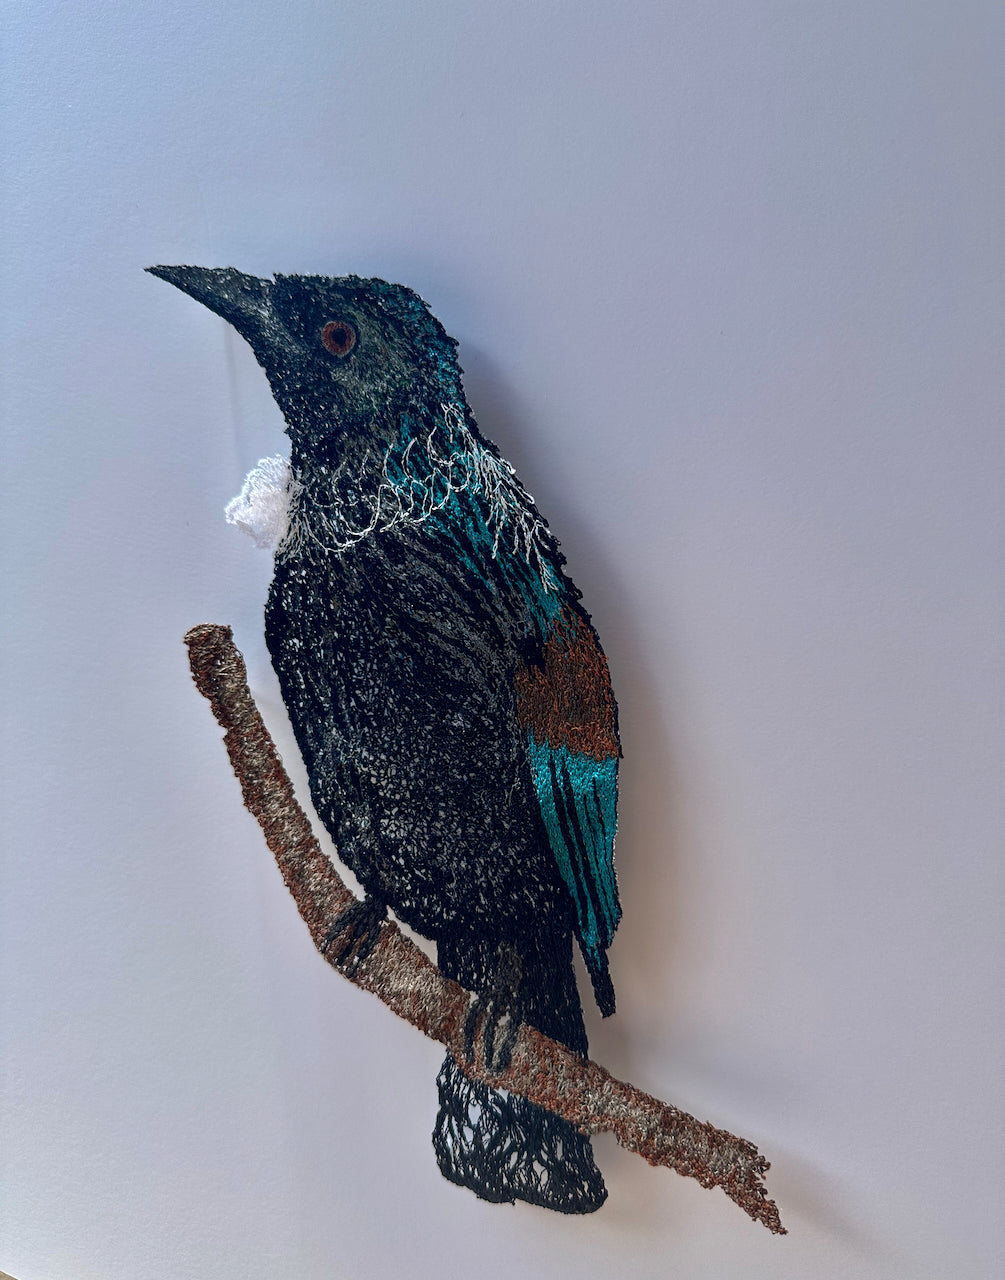 Tui sculptural embroidery.